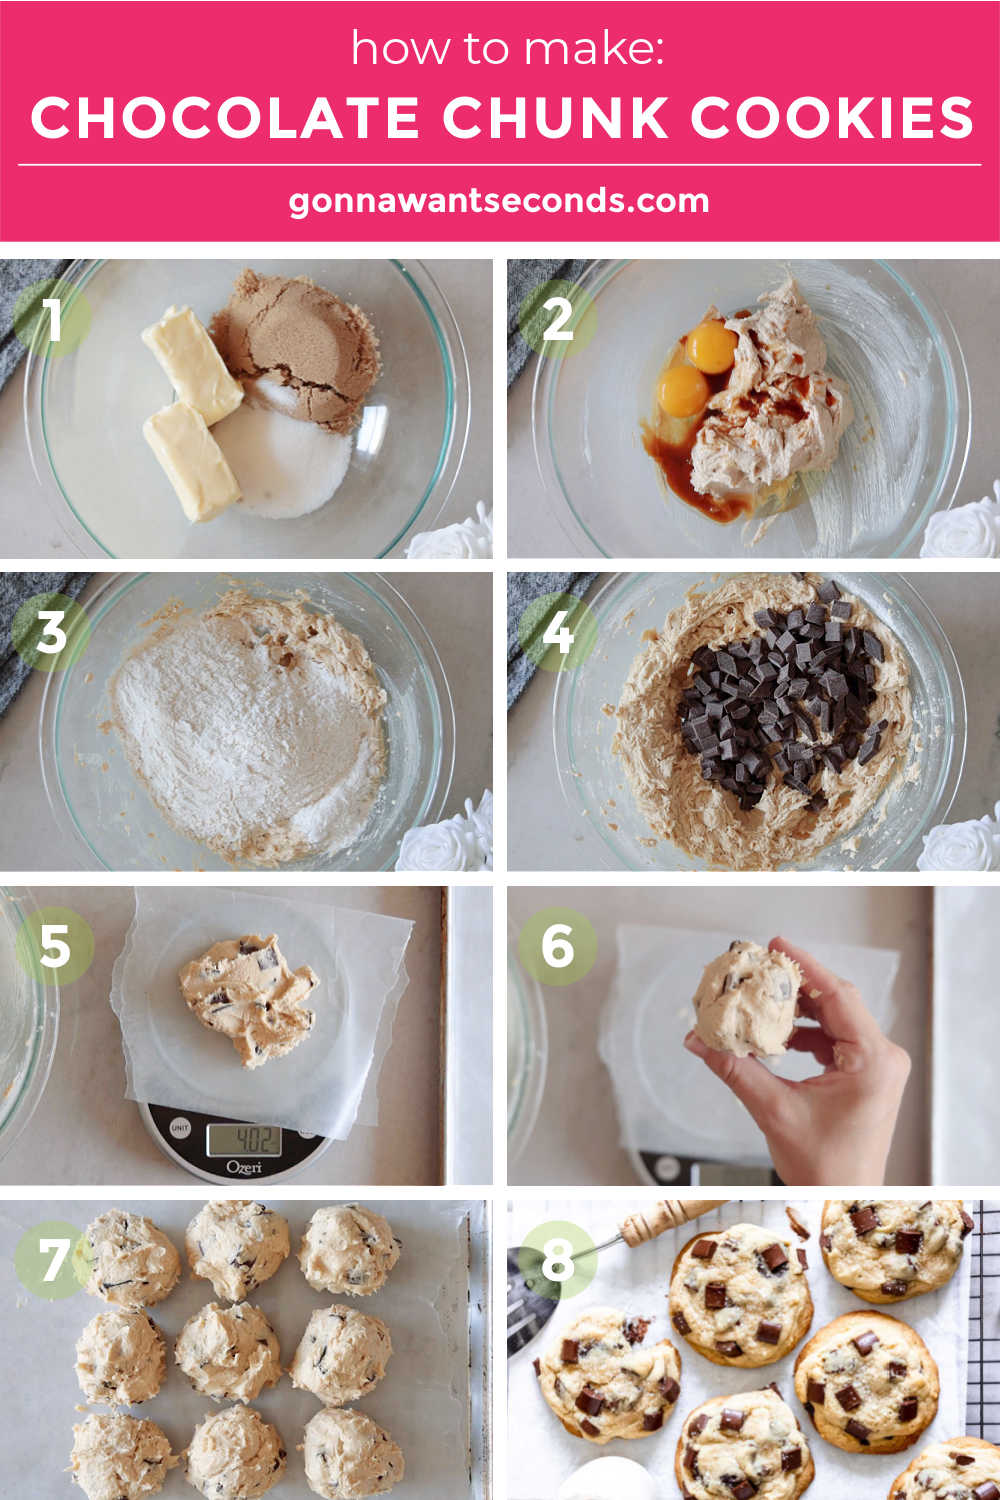 step by step how to make chocolate chunk cookies